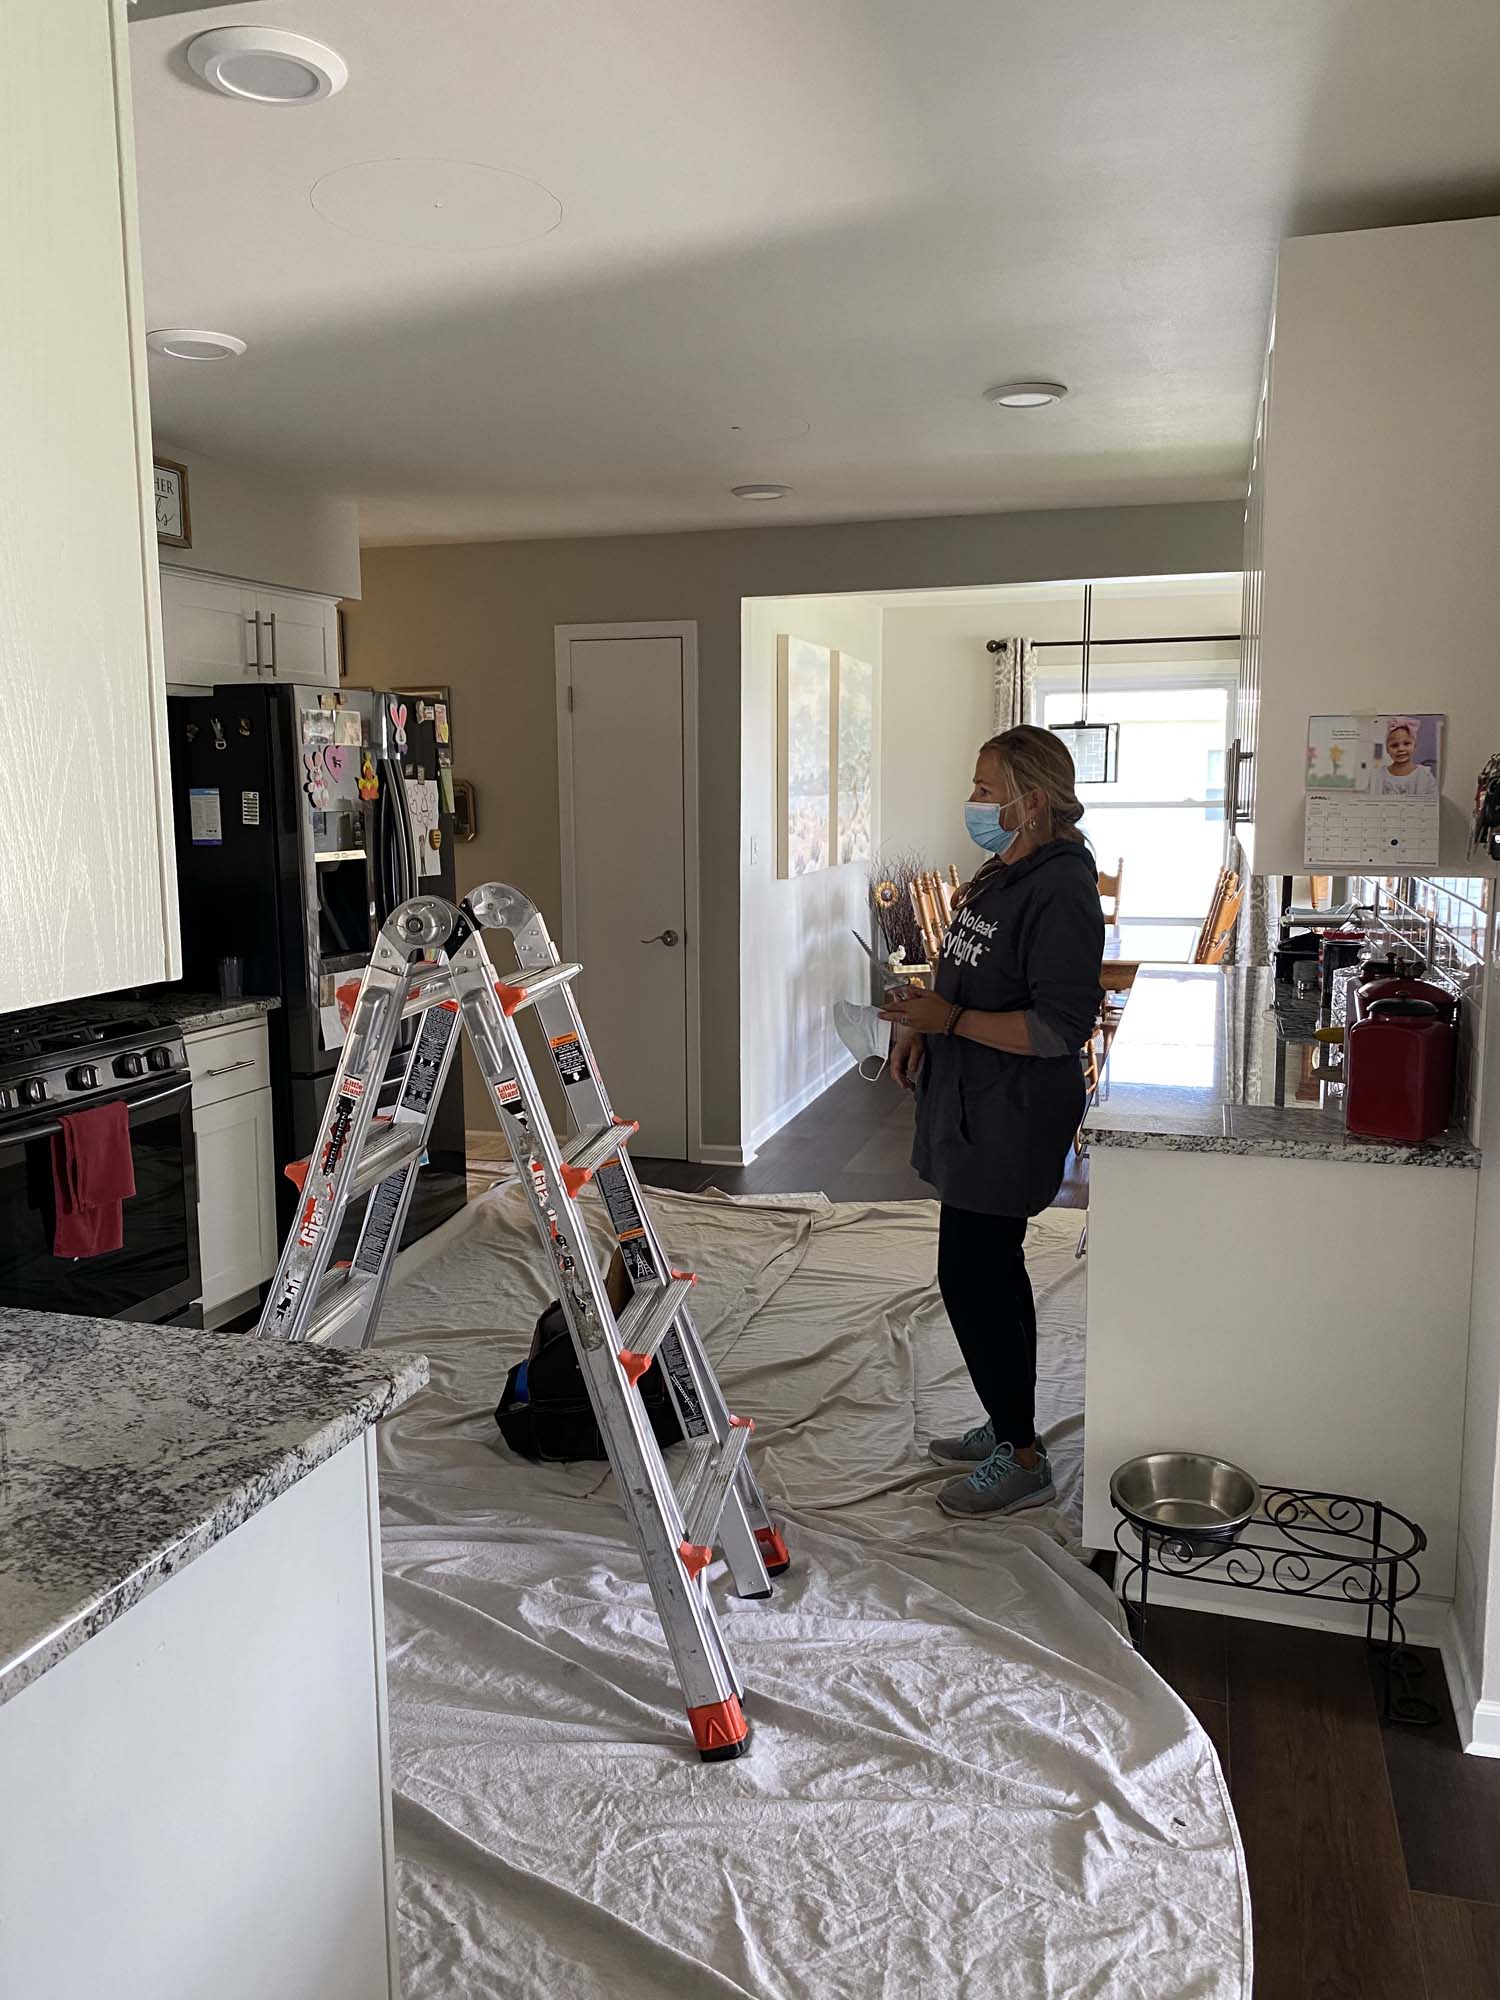 Team prepares a kitchen for two new skylights with drop-cloths, ladders, and tools